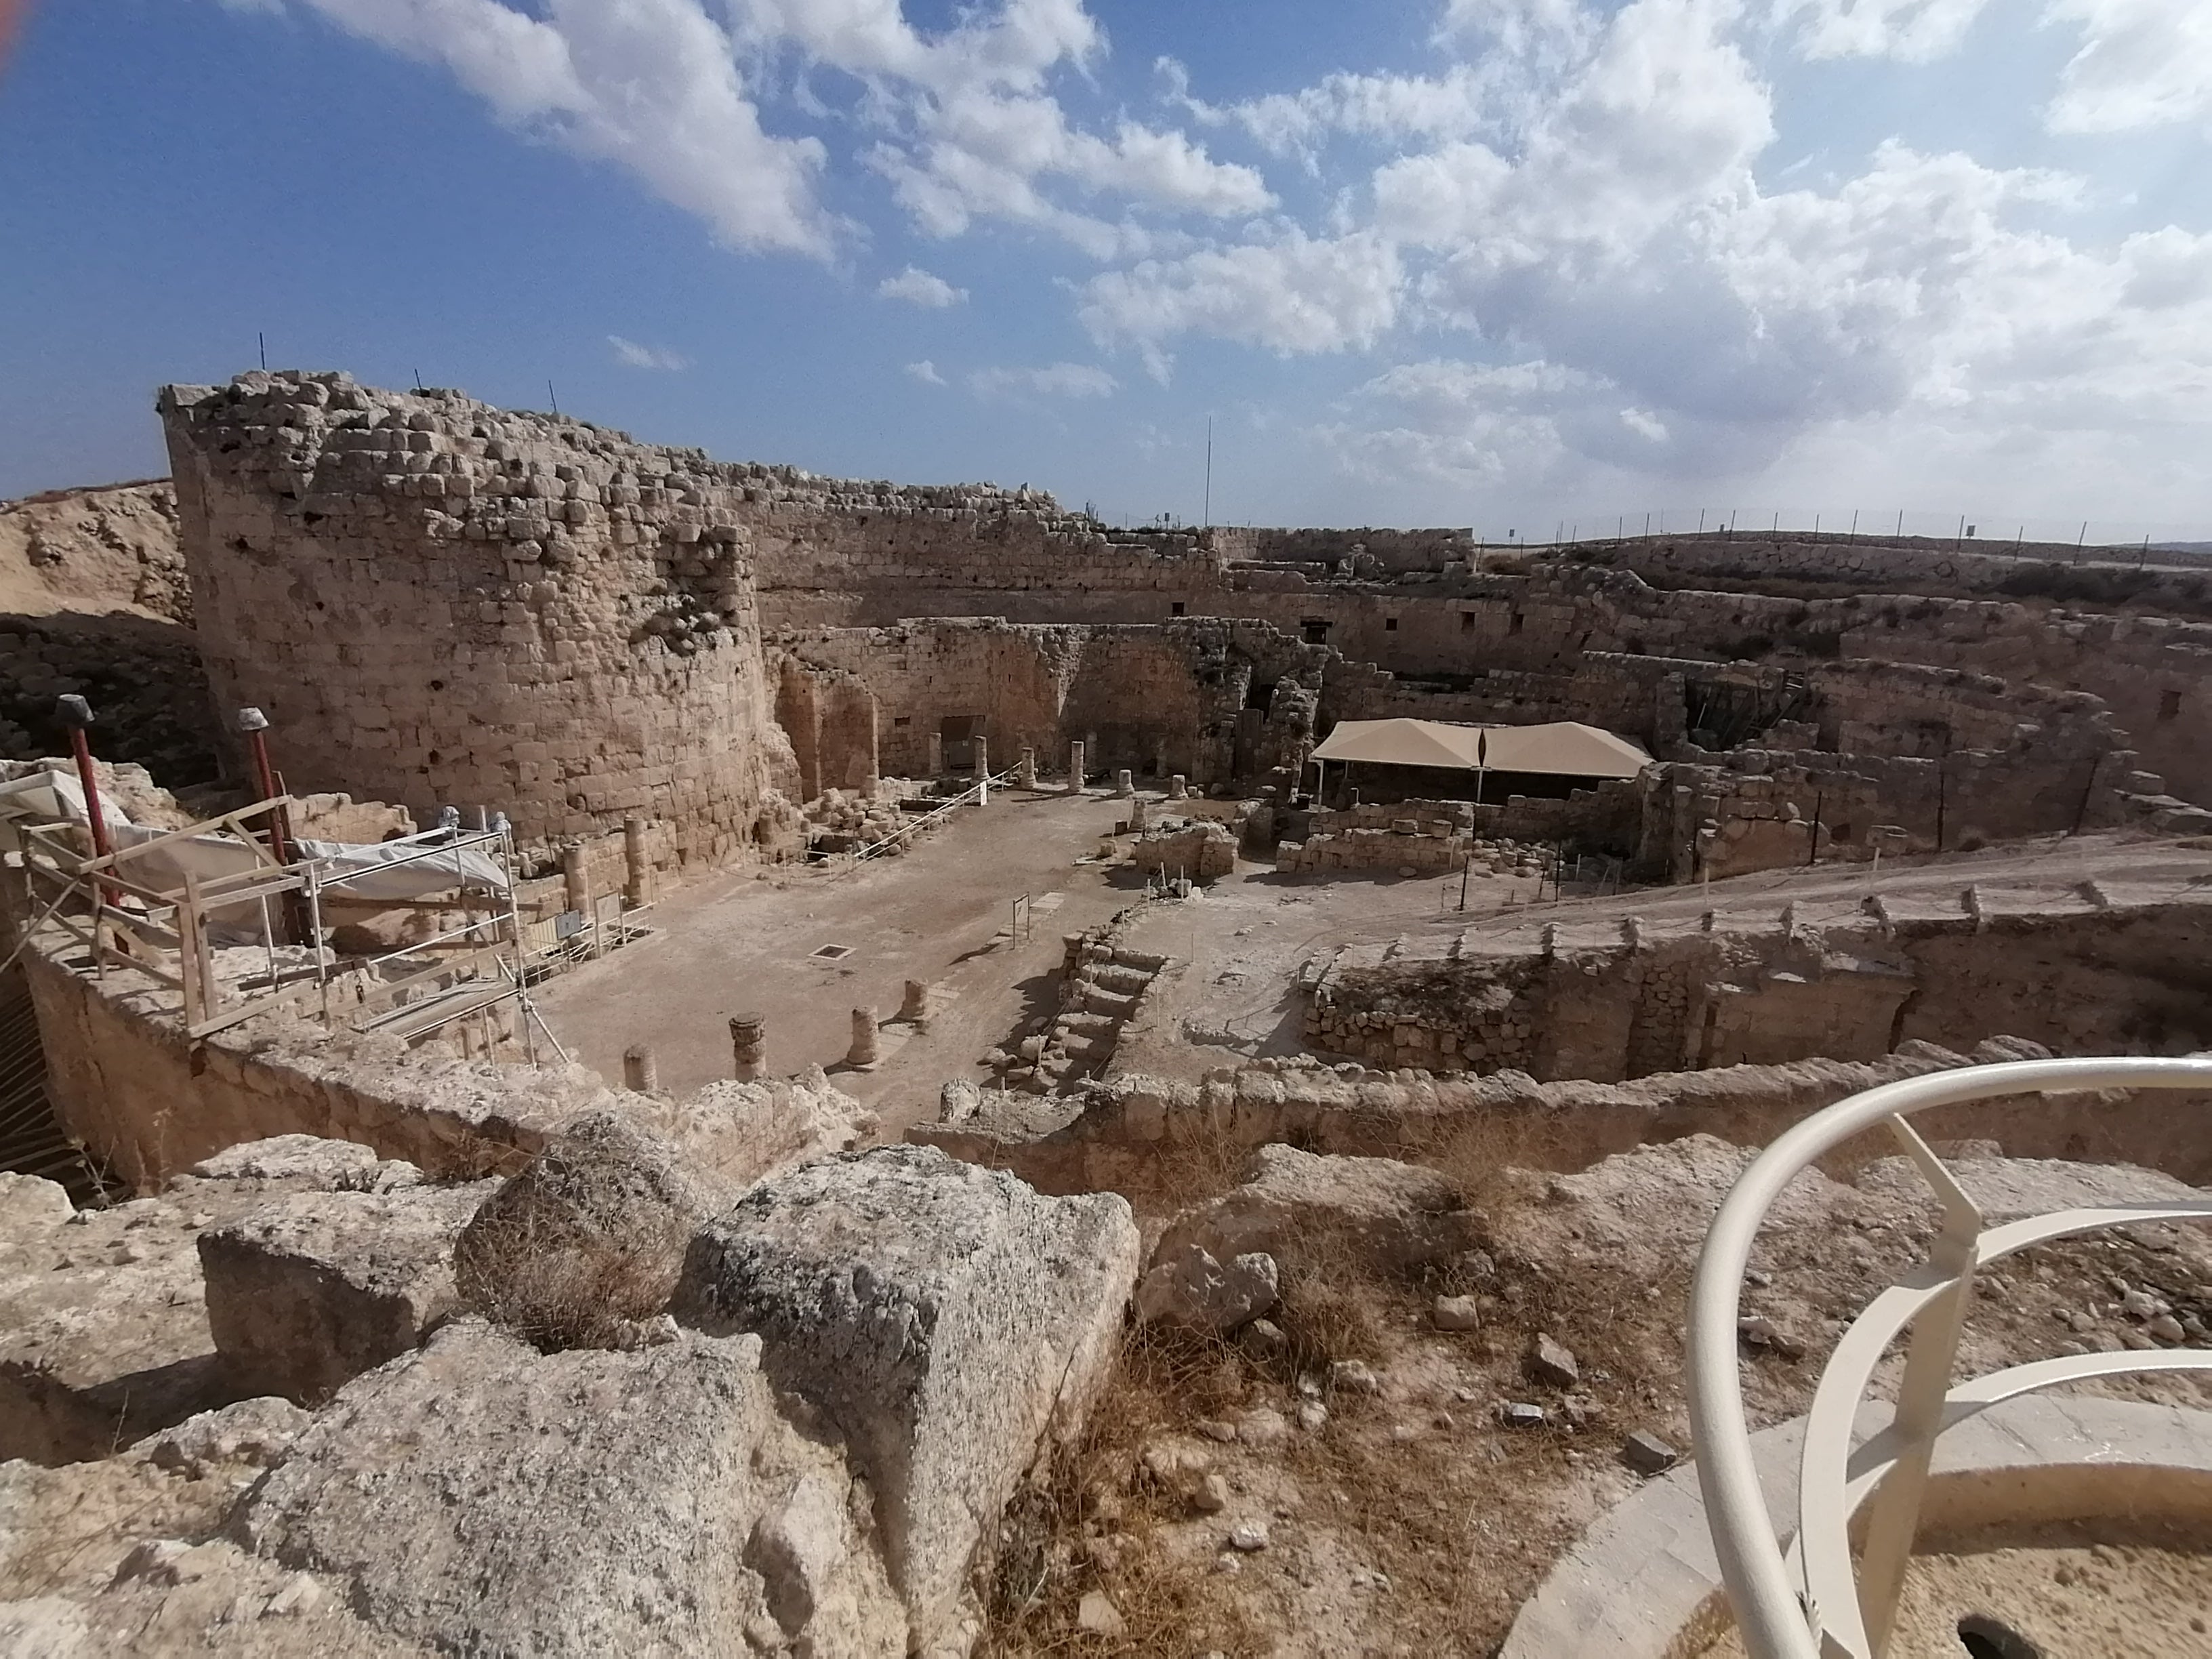 Herod's palace Judean Desert Tour to Bethlehem Full Day with guide